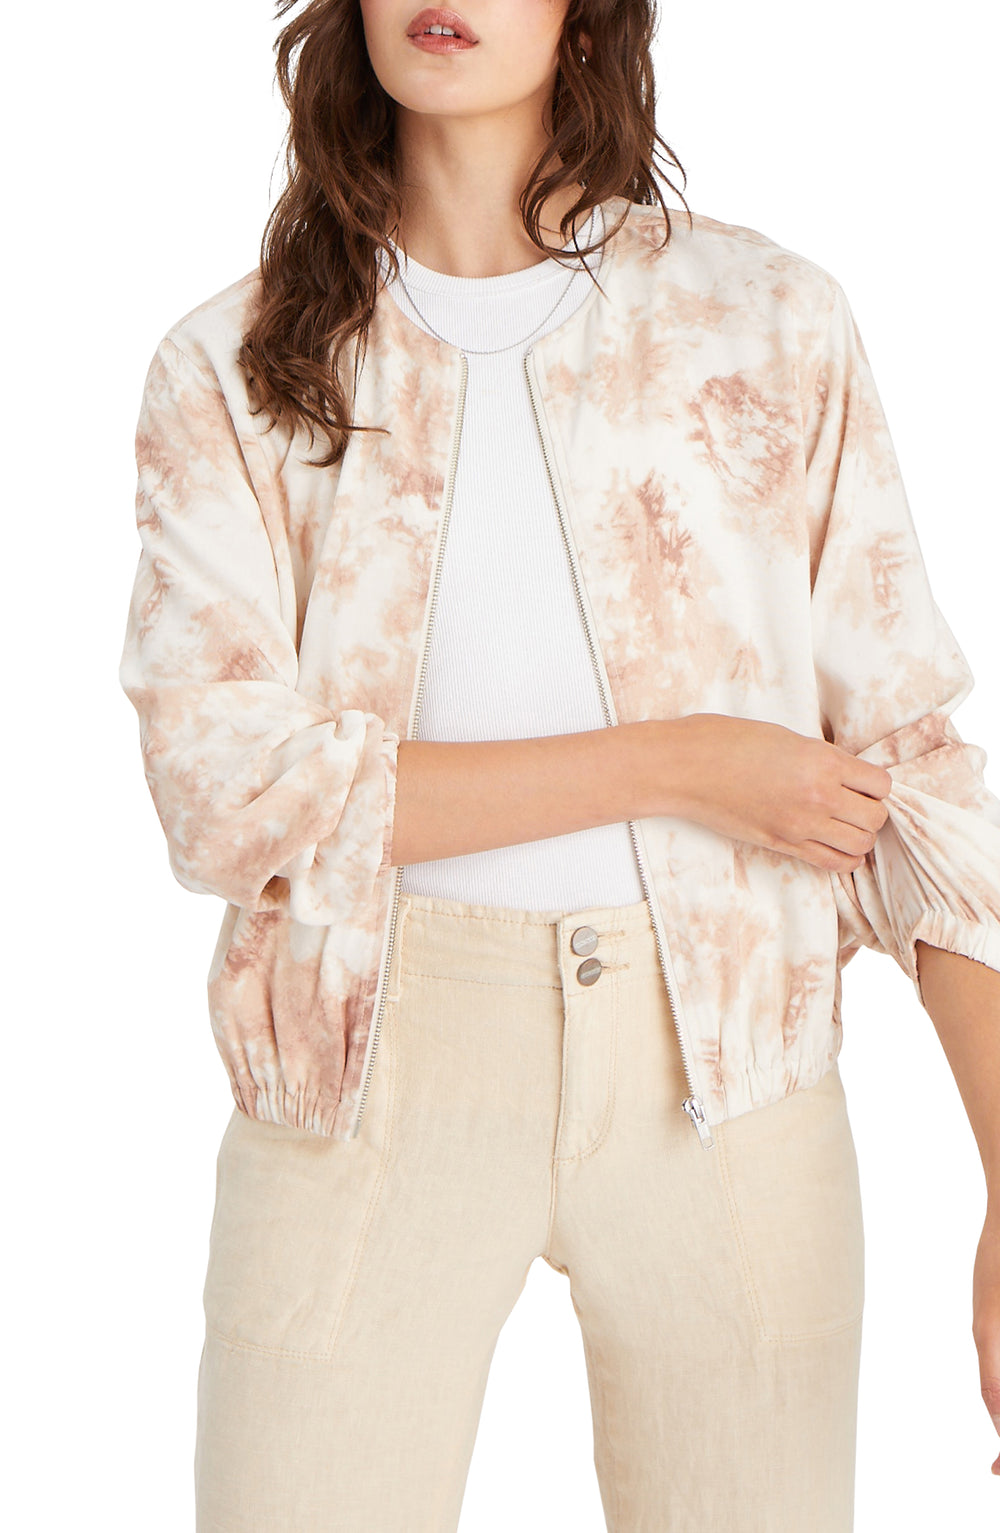 JUST BECAUSE JACKET - Kingfisher Road - Online Boutique